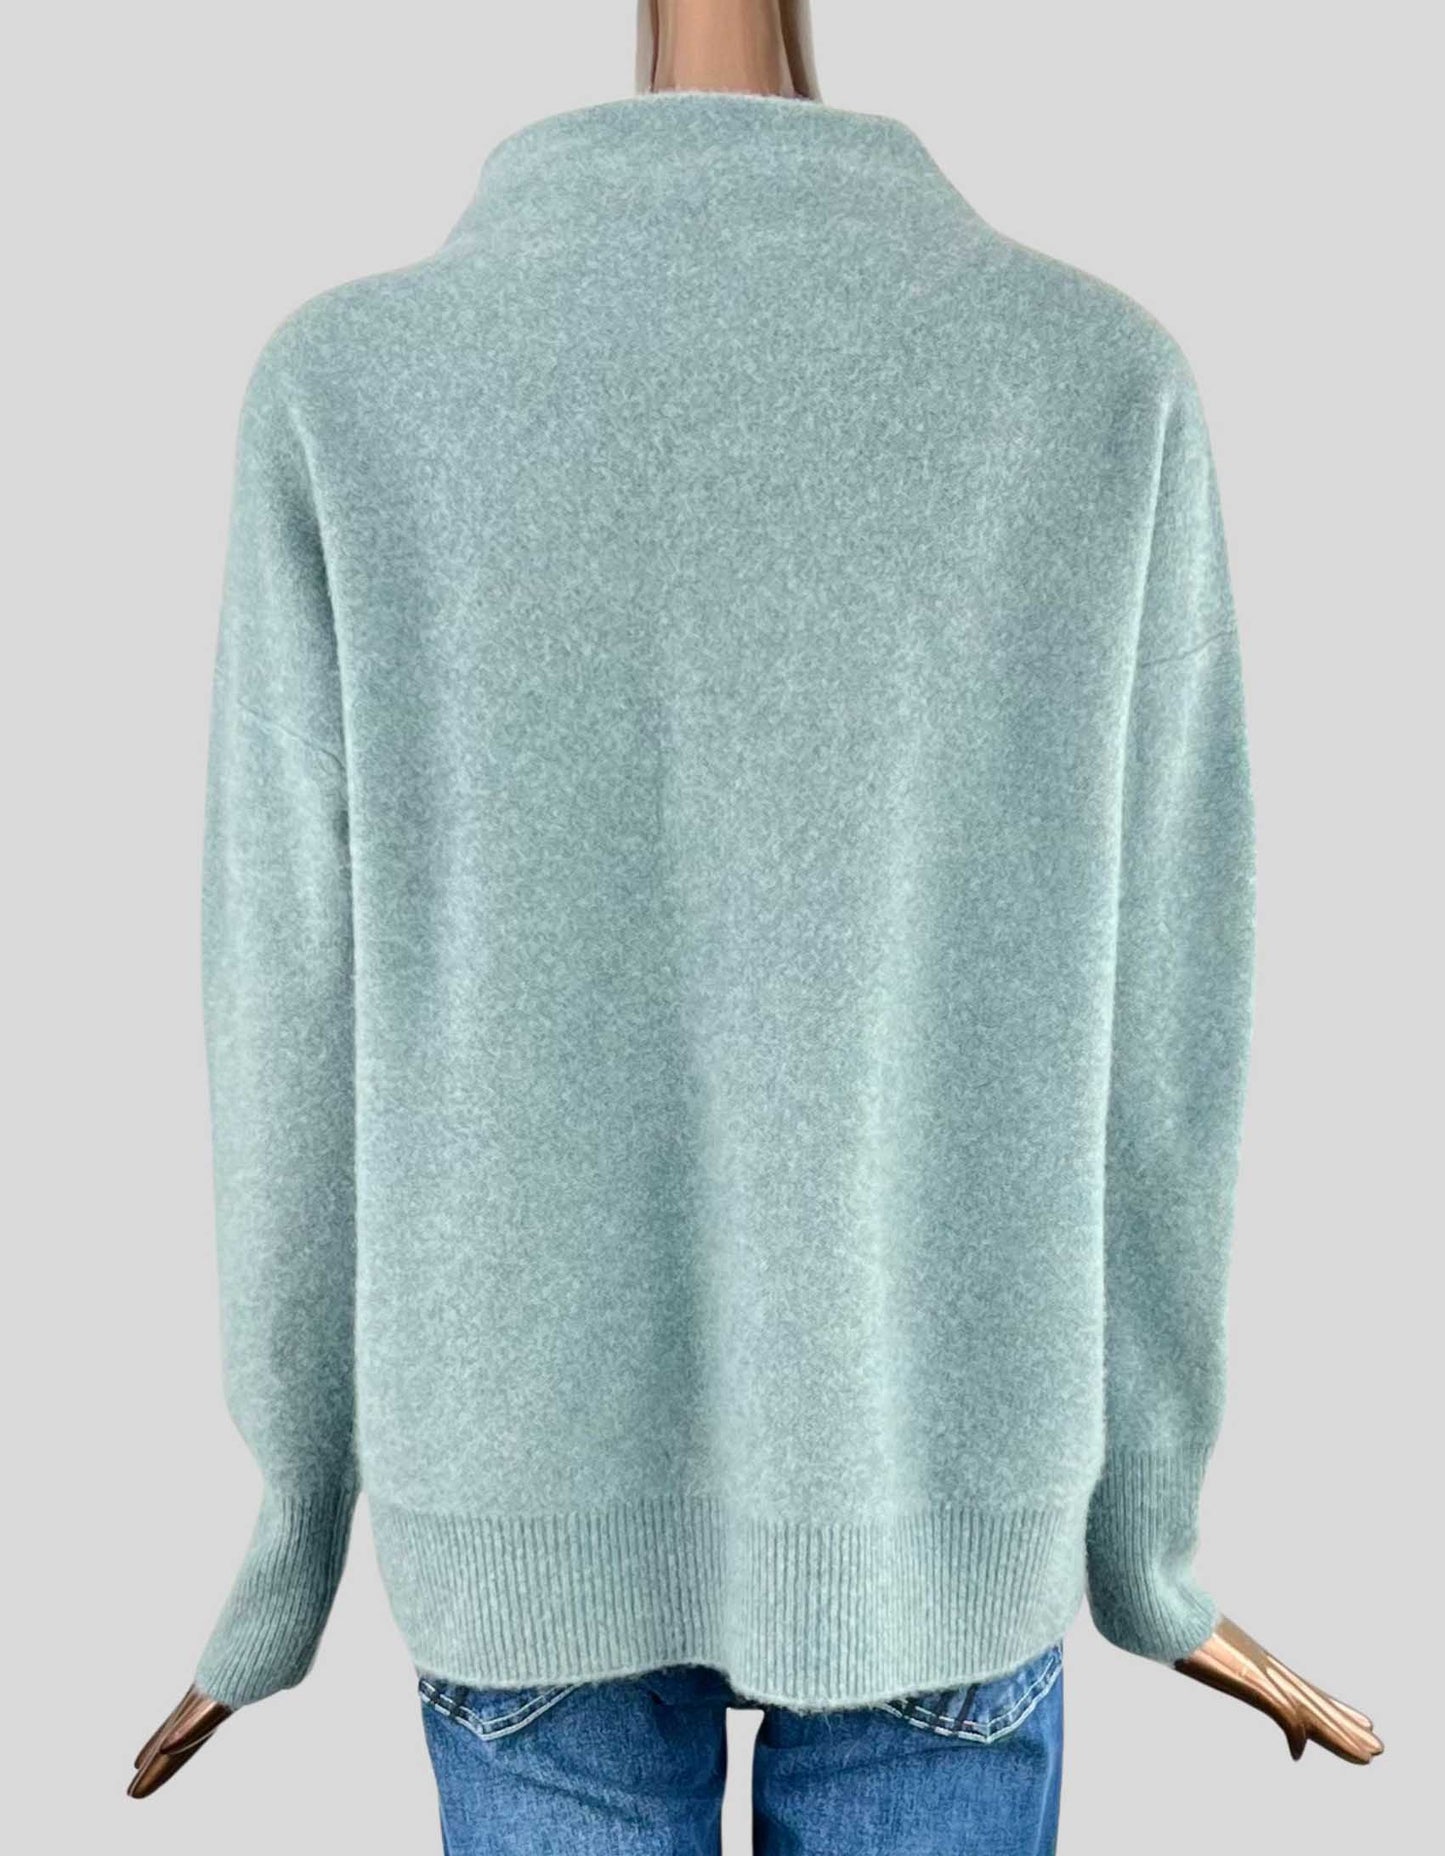 VINCE Plush Cashmere Funnel Neck Sweater w/ Tags - Small